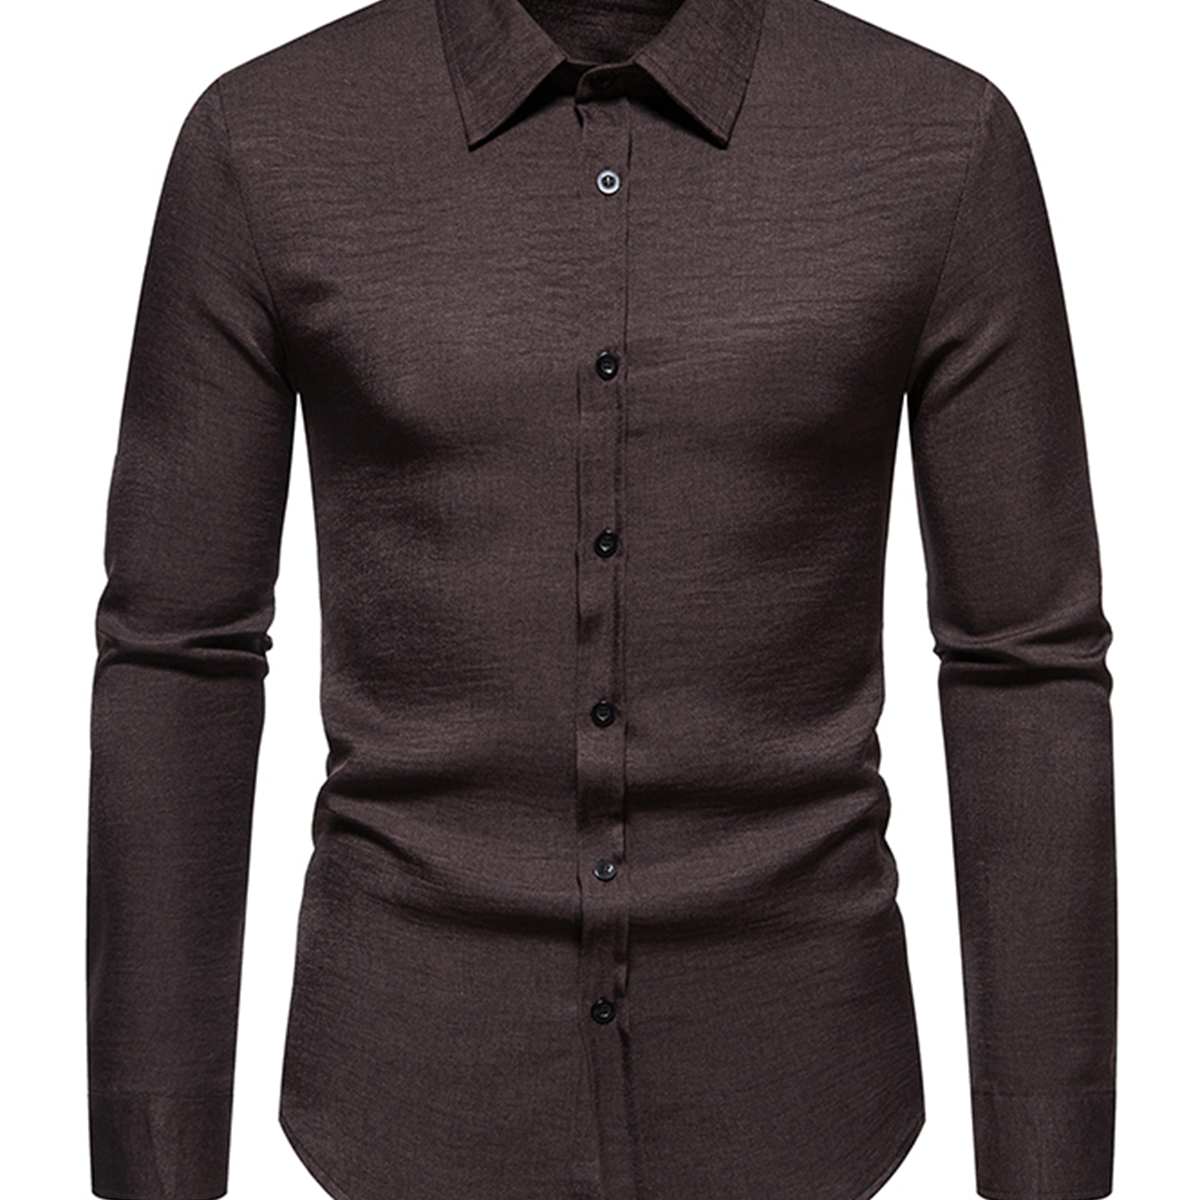 Men's Solid Color Button Up Long Sleeve  Classic Casual Shirt